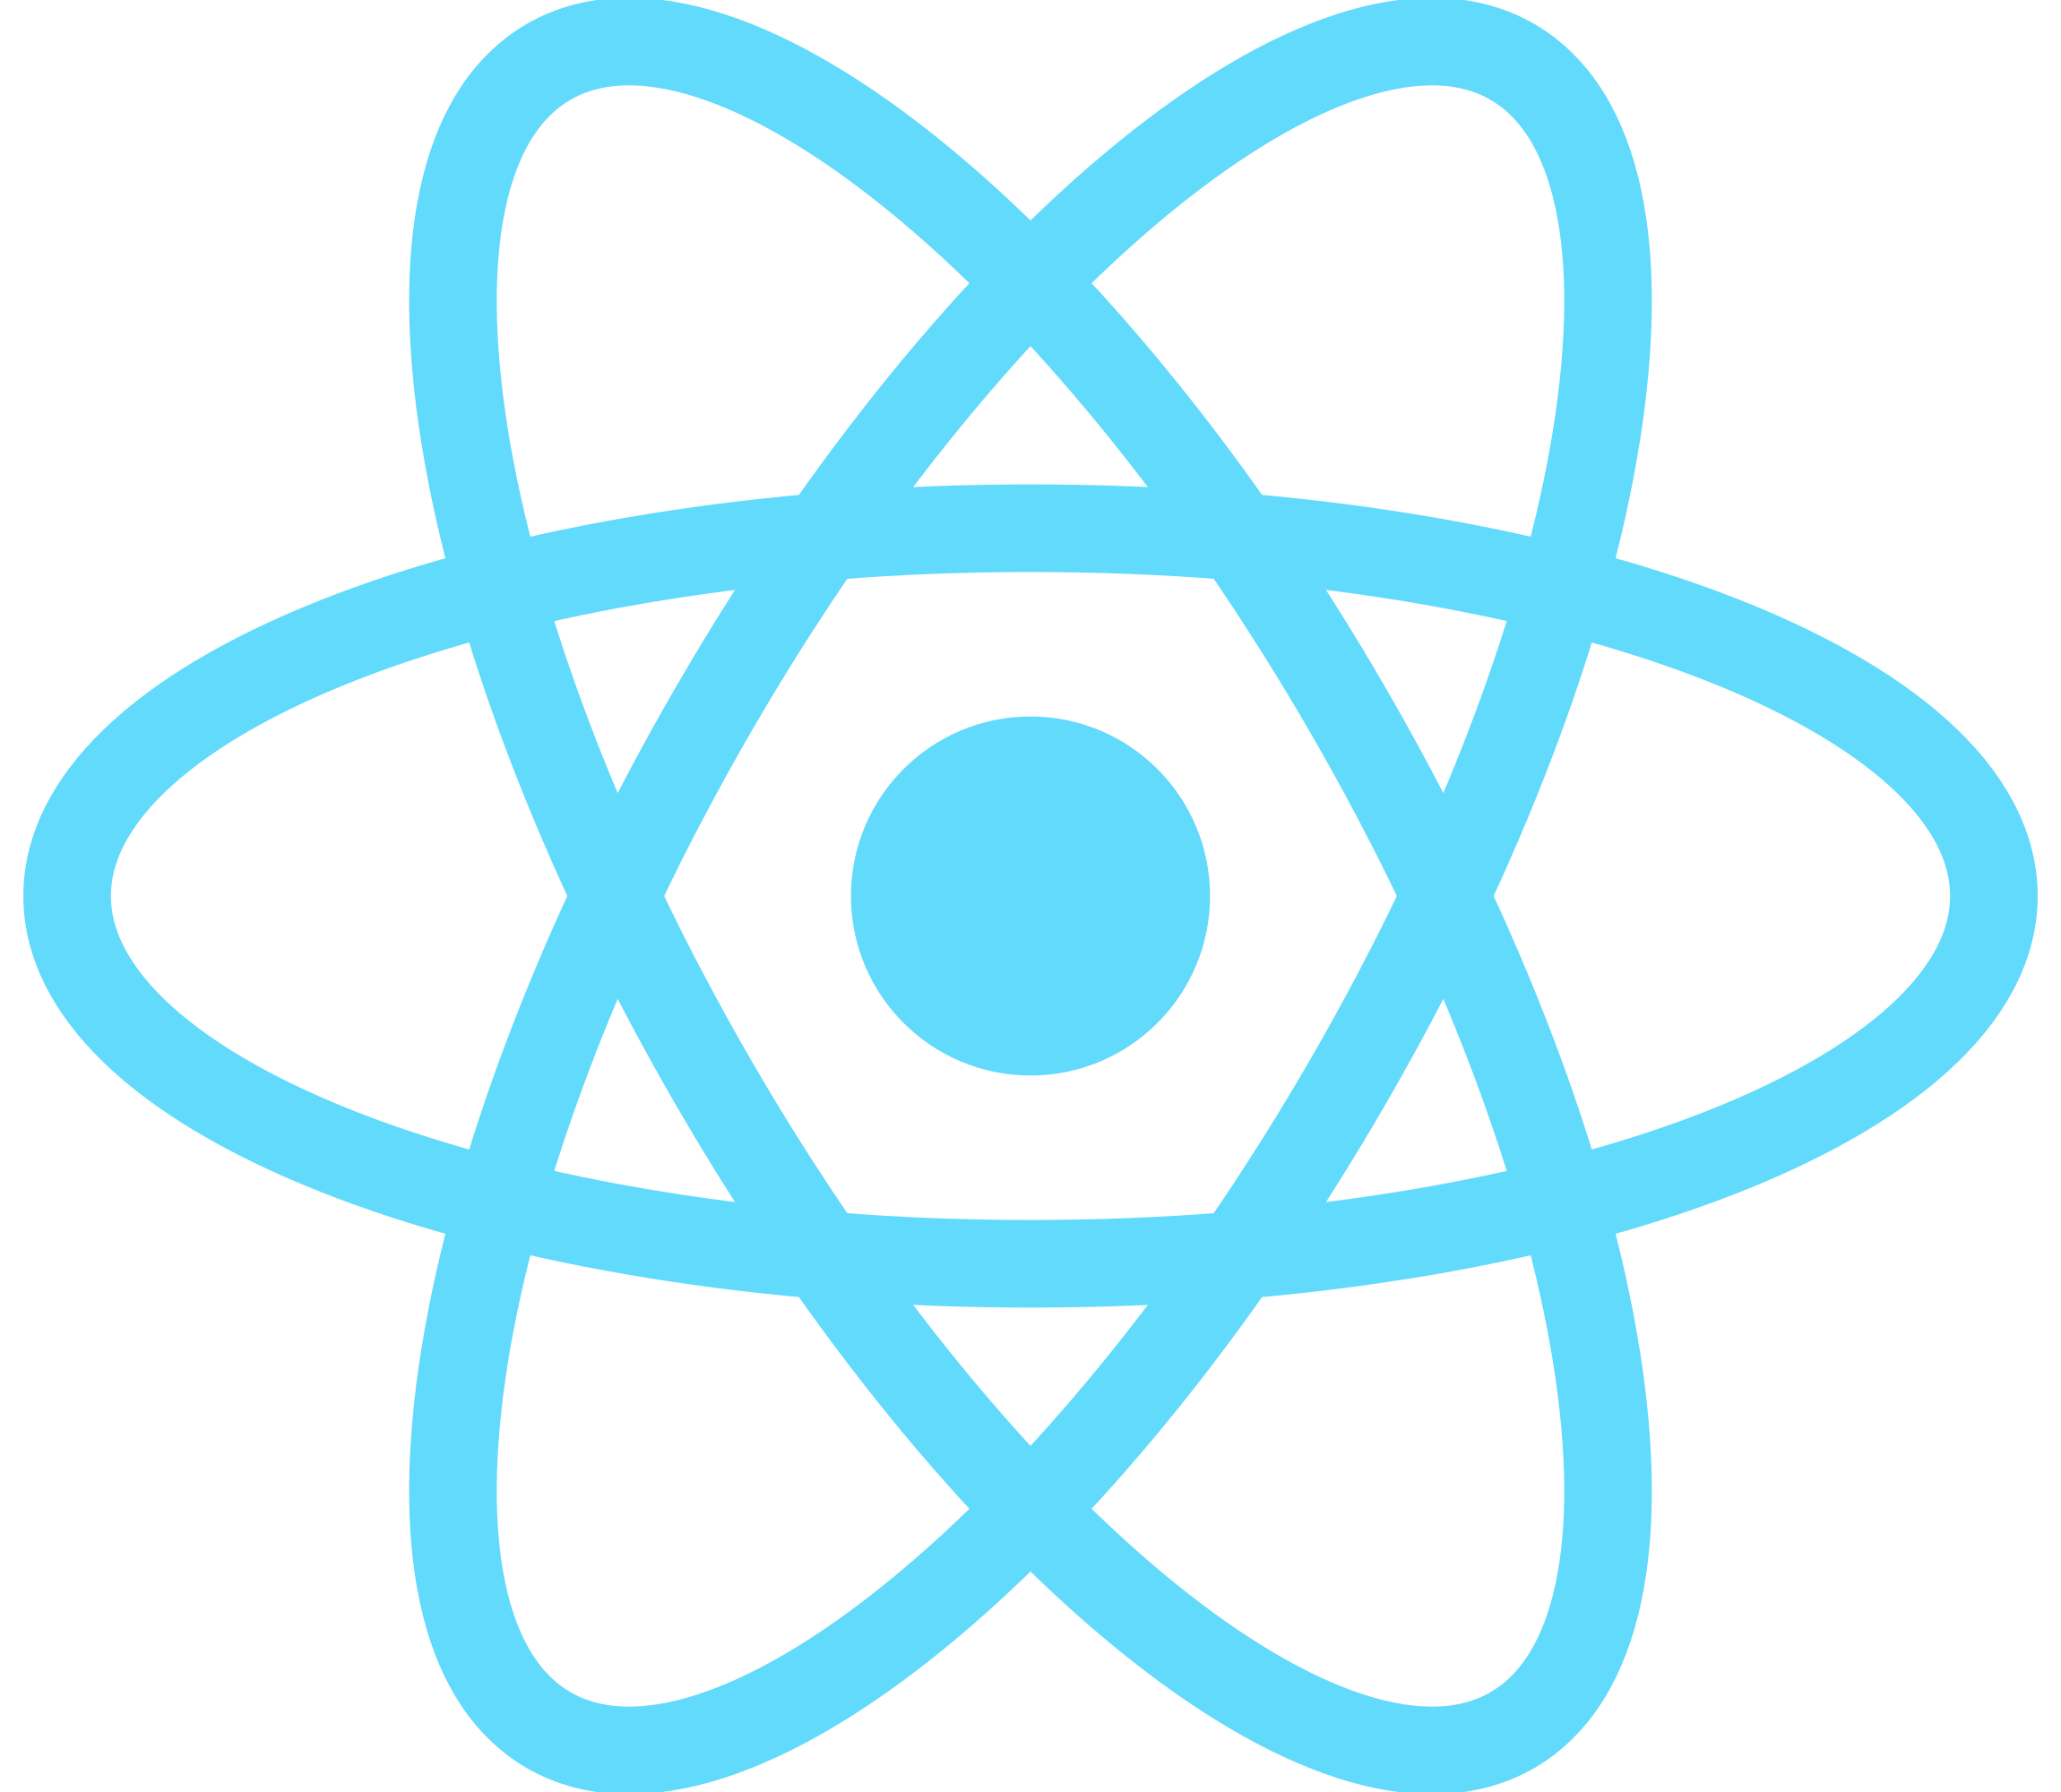 React-icon.svg.png